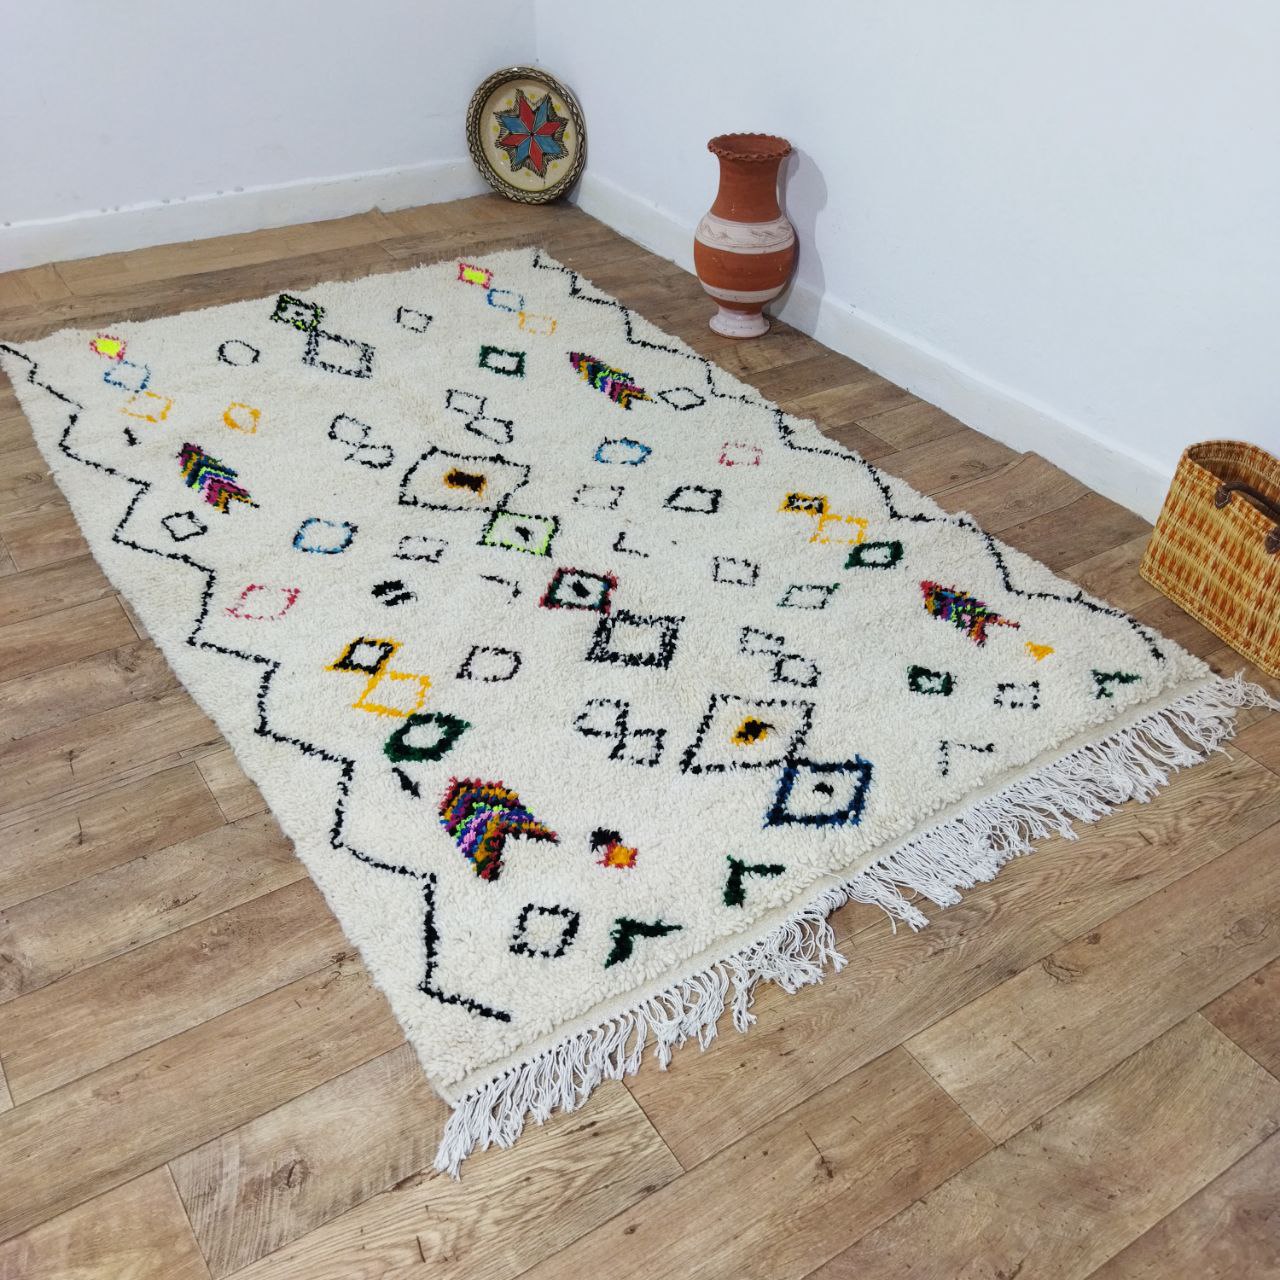 Discover Cultural Treasures - Moroccan Handcrafted Azilal Berber Rugs